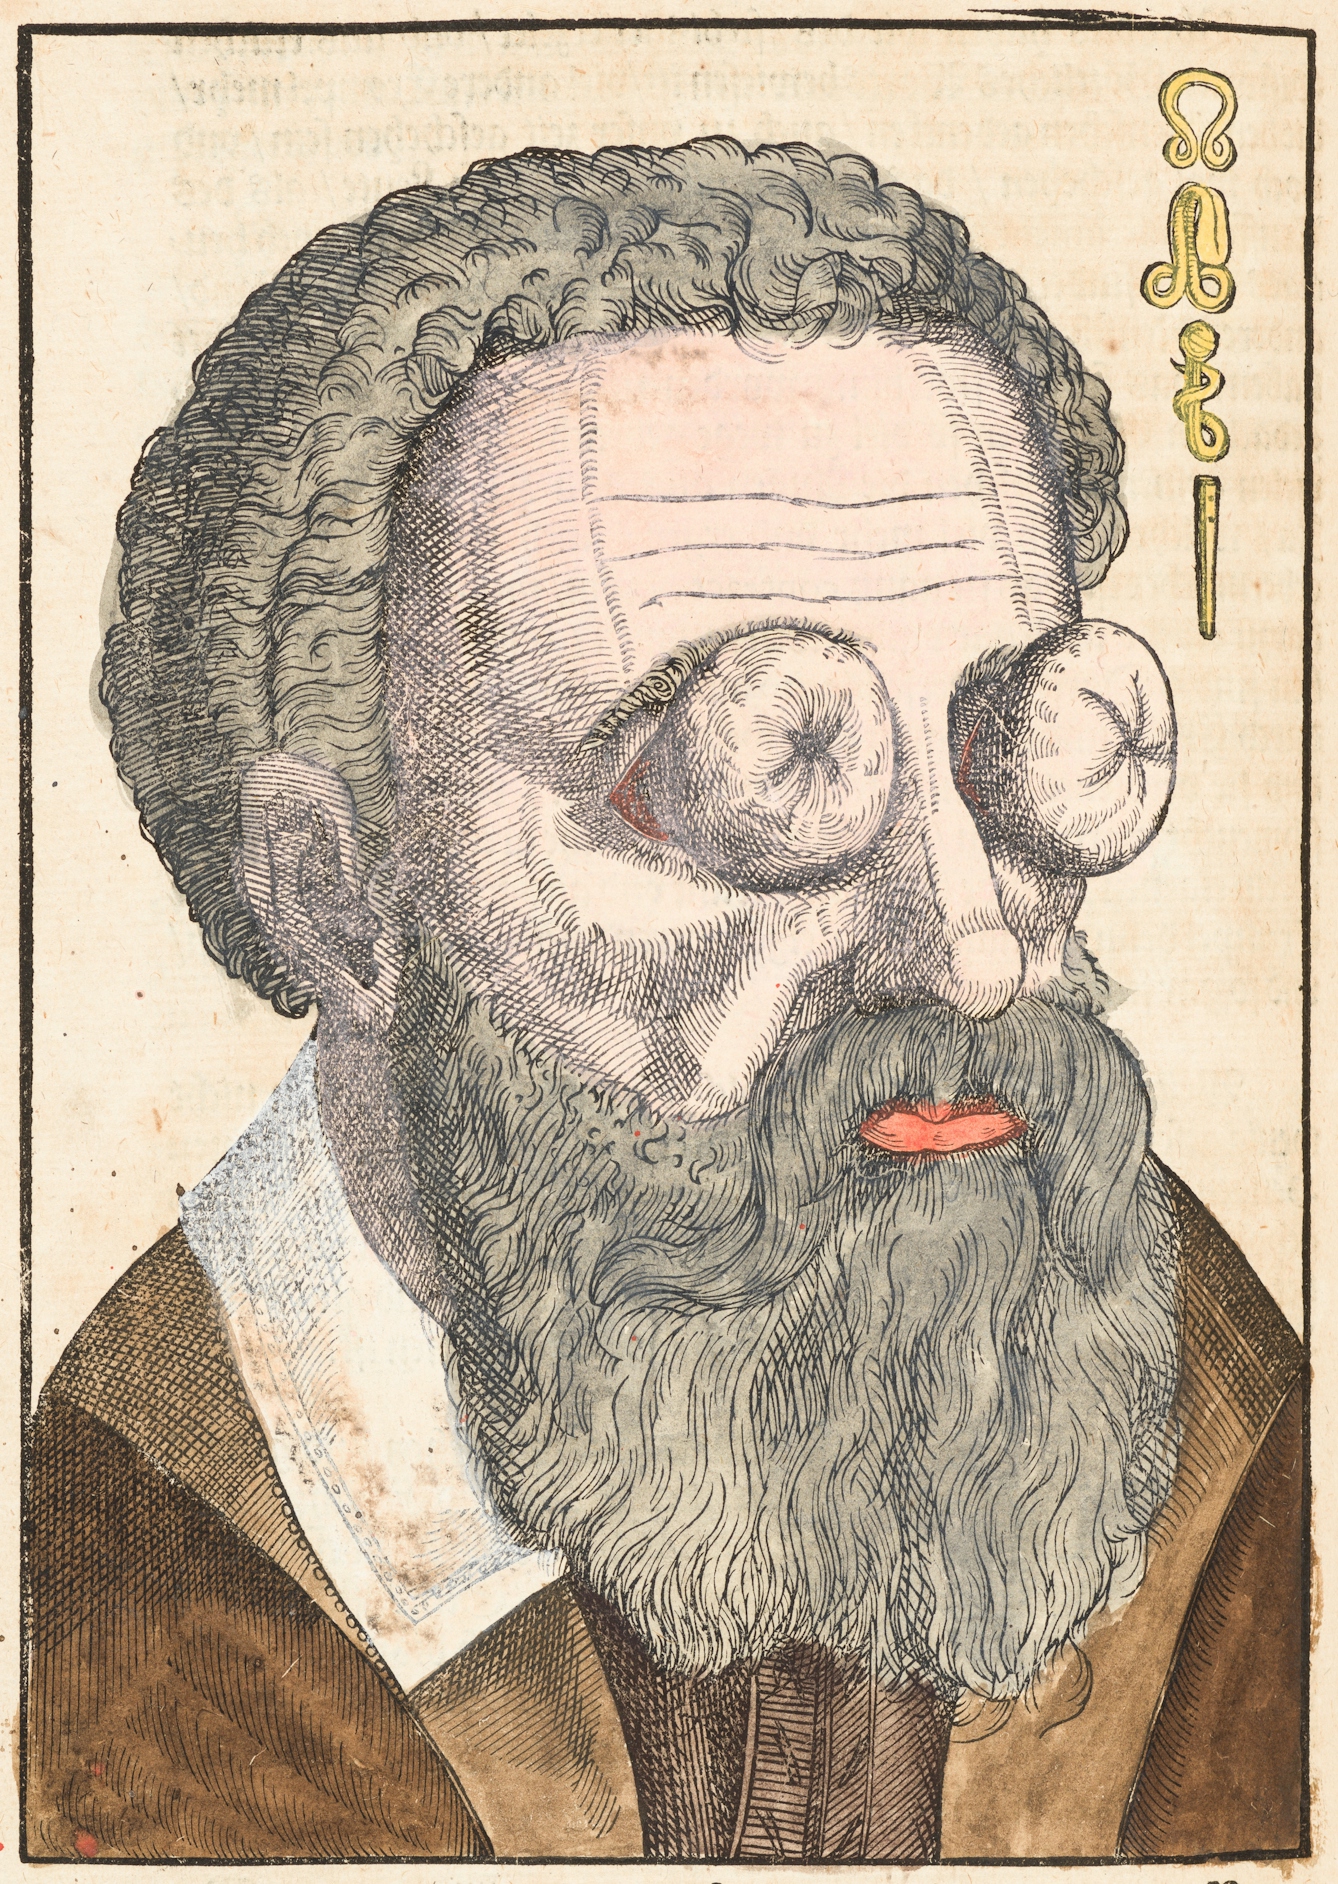 Coloured engraving from a 16th century book showing a bearded man's head and the collar of his clothes. His eyes are covered by two objects which resemble squash-like vegetables.